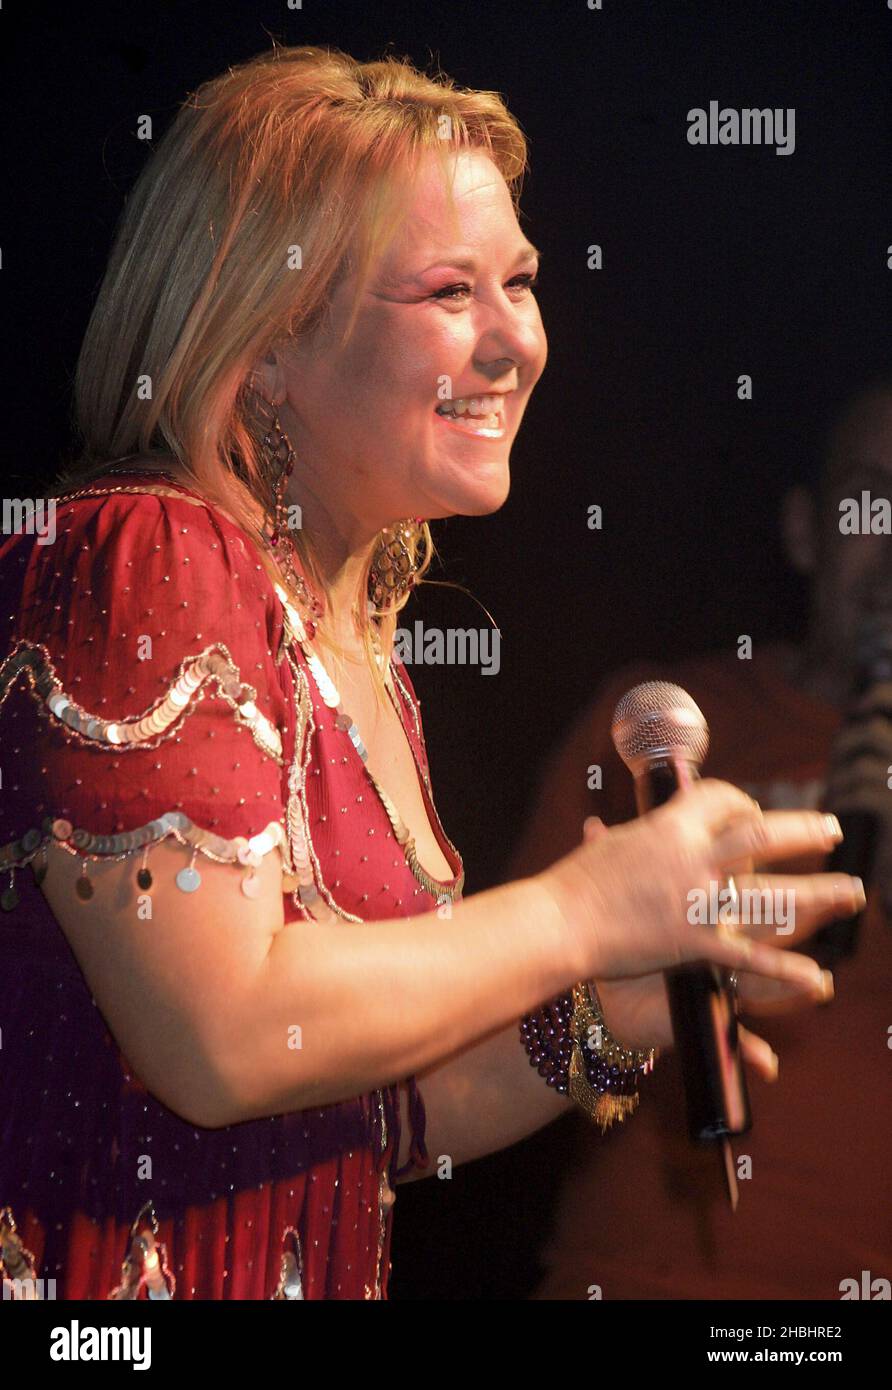 Soapstar Wendi Peters, of Coronation Street, contestant runner up on ITV's celebrity talent show Soapstar Superstar performs live on stage at the GAY Astoria in London on January 21,2006. Stock Photo